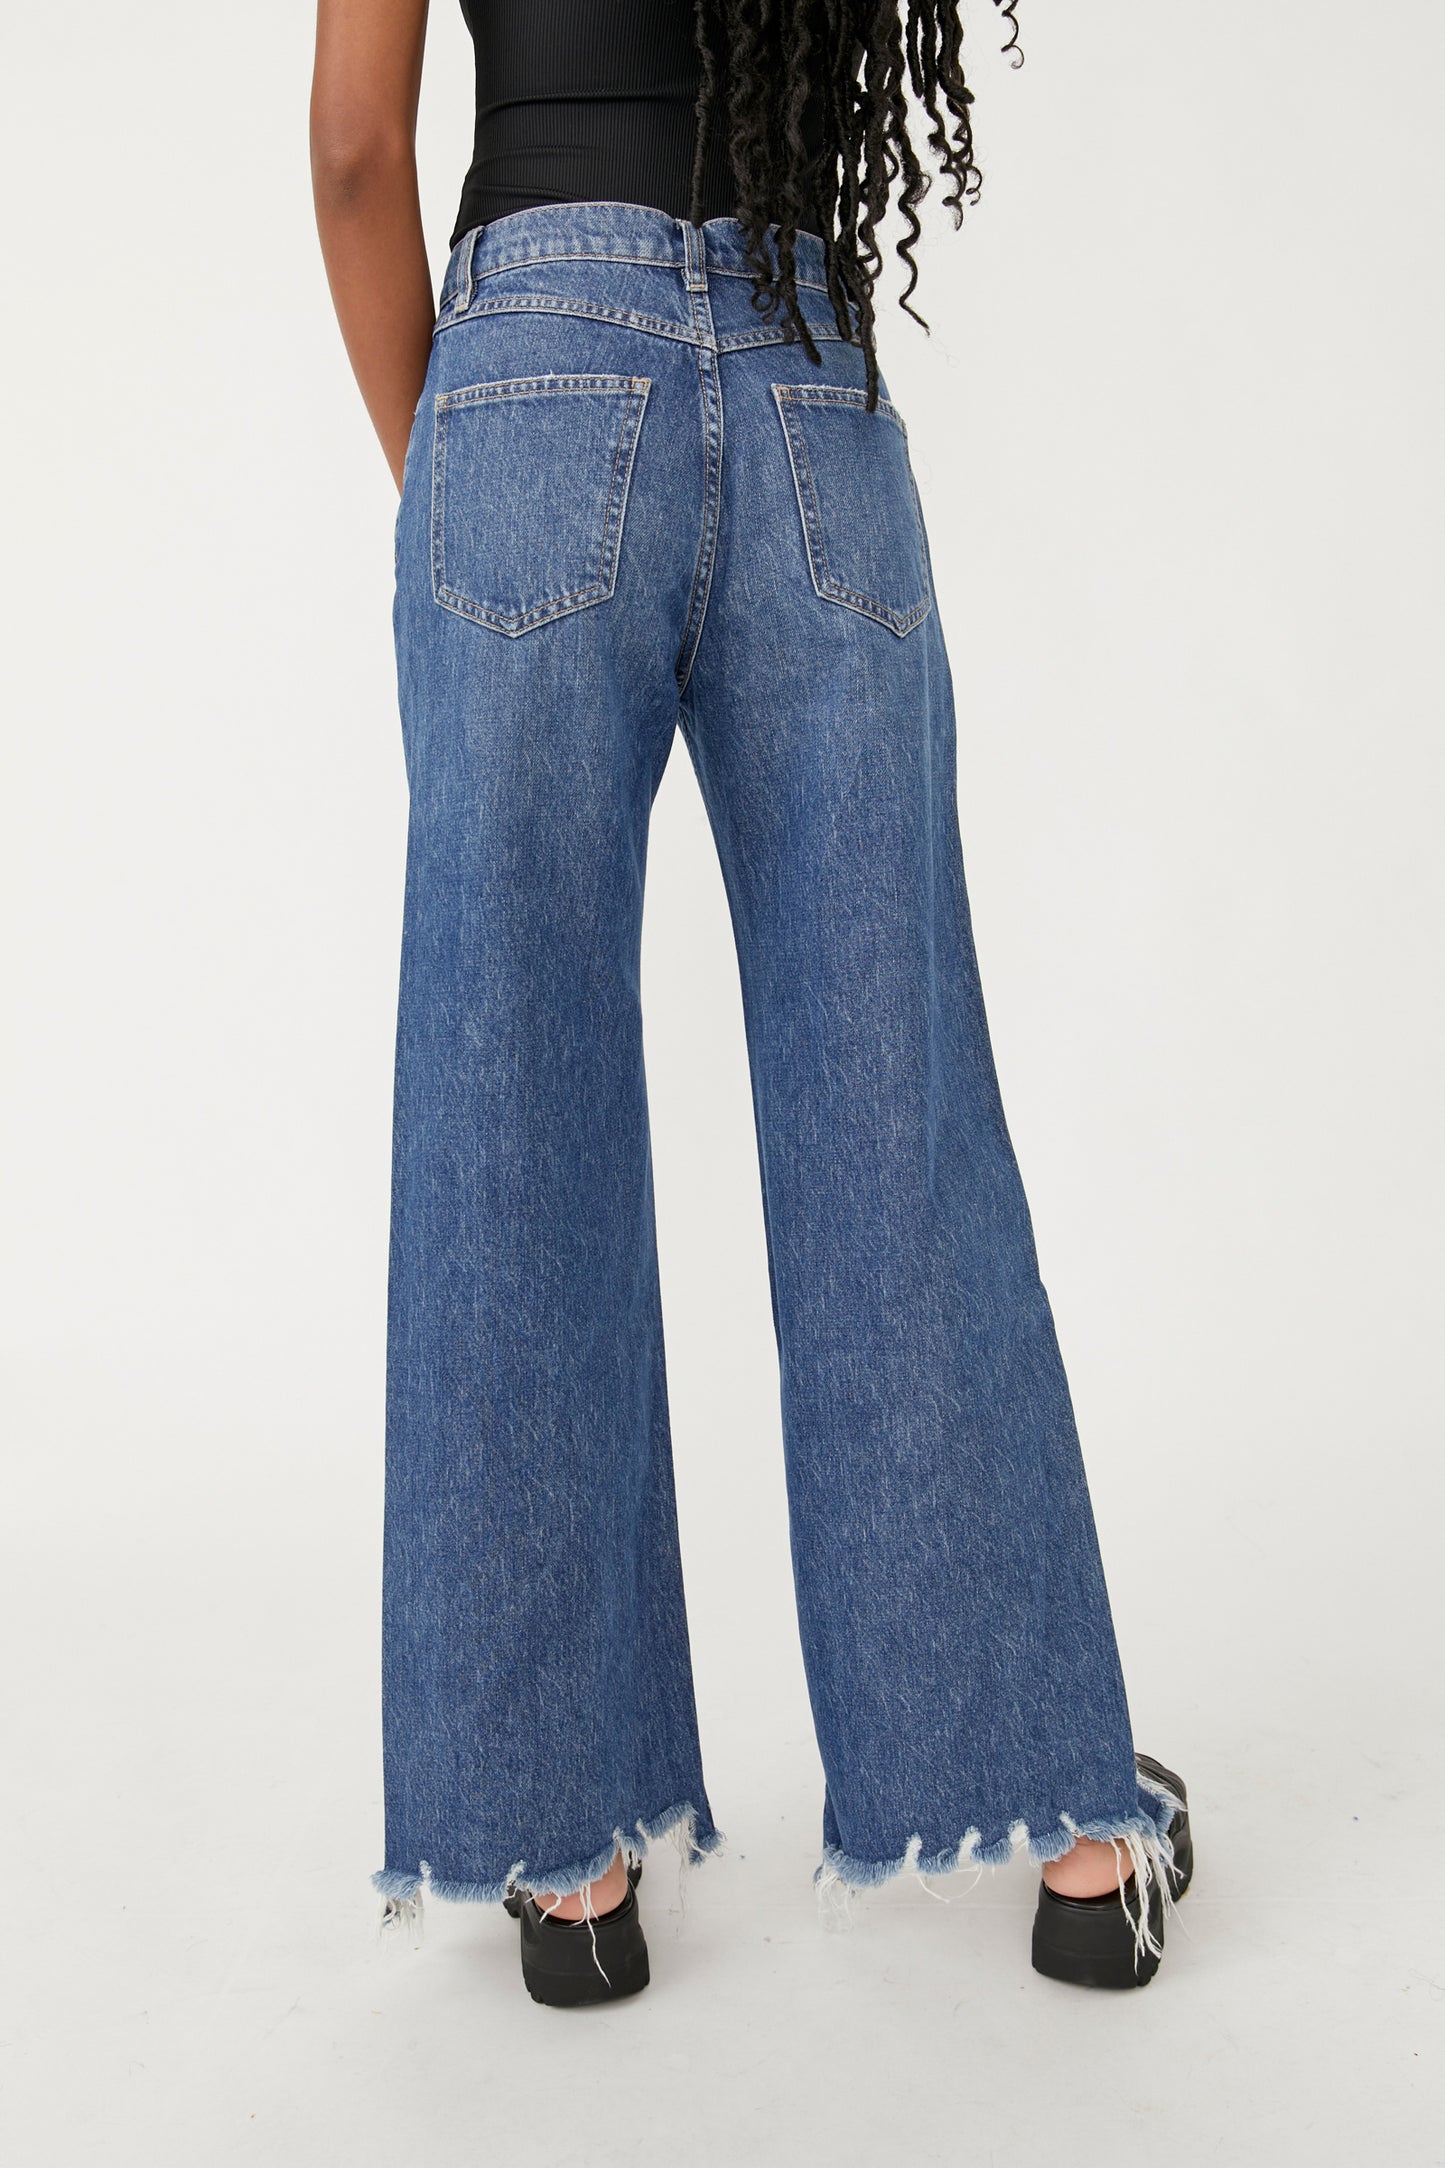 Straight Up Baggy Jeans Free People